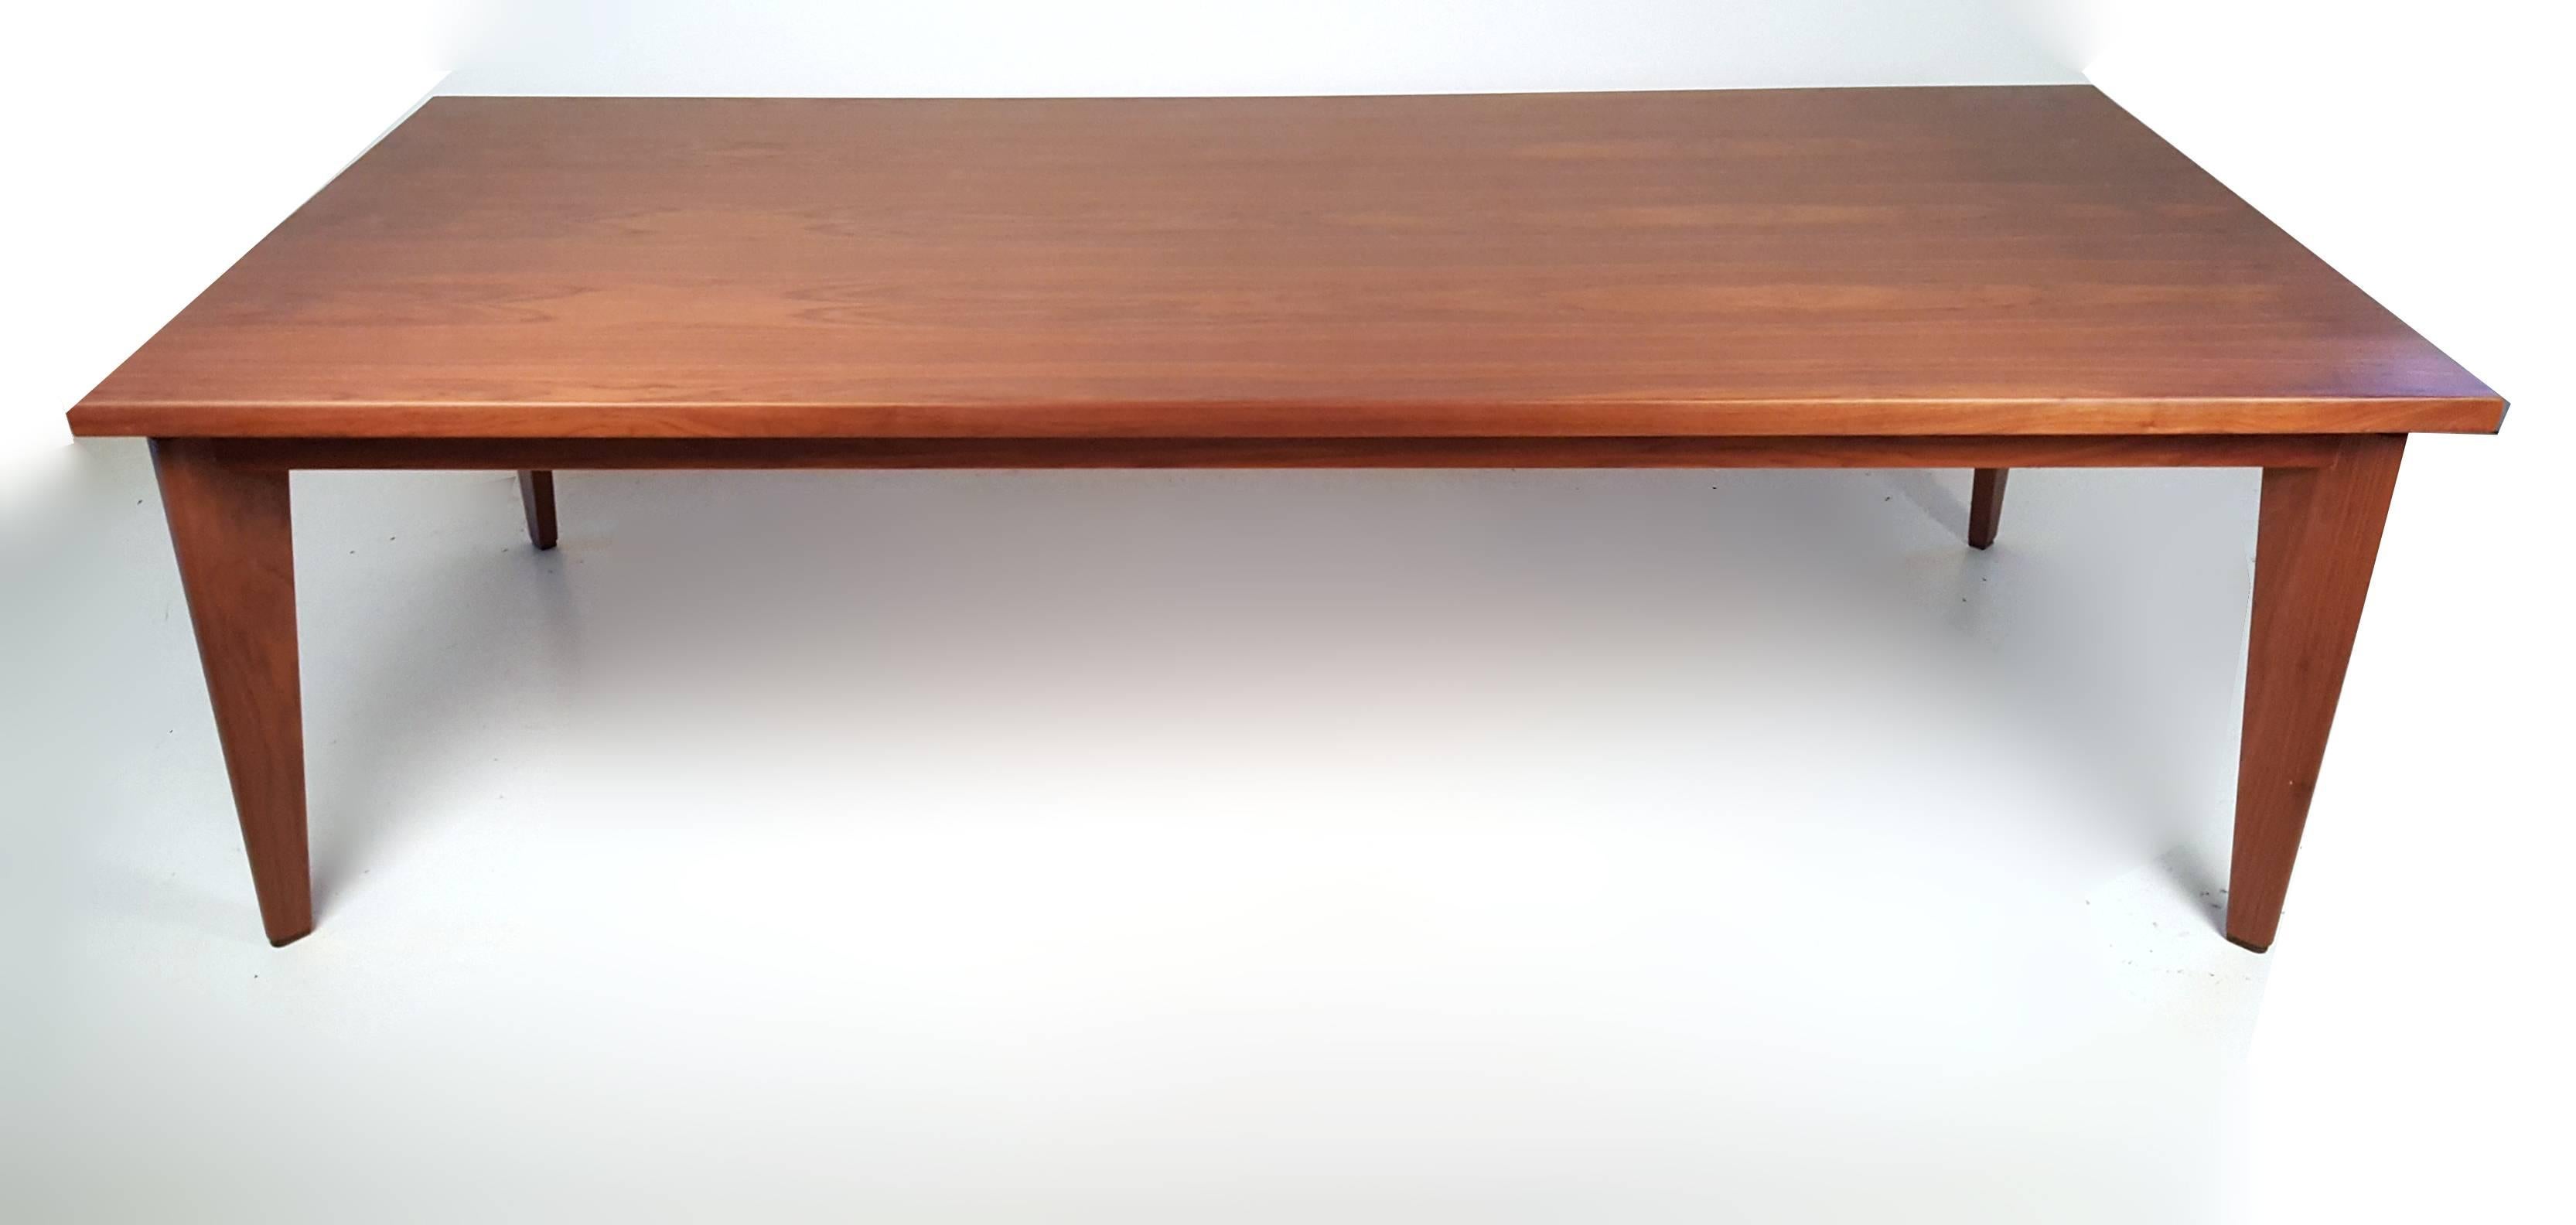 1960s custom-made table by Dallas Studio craftsman Ben Kanowsky. The table was created using solid walnut legs, a solid wood table skirt with solid wood banding around a book-matched walnut veneer top. You can certainly see the influence of Jean